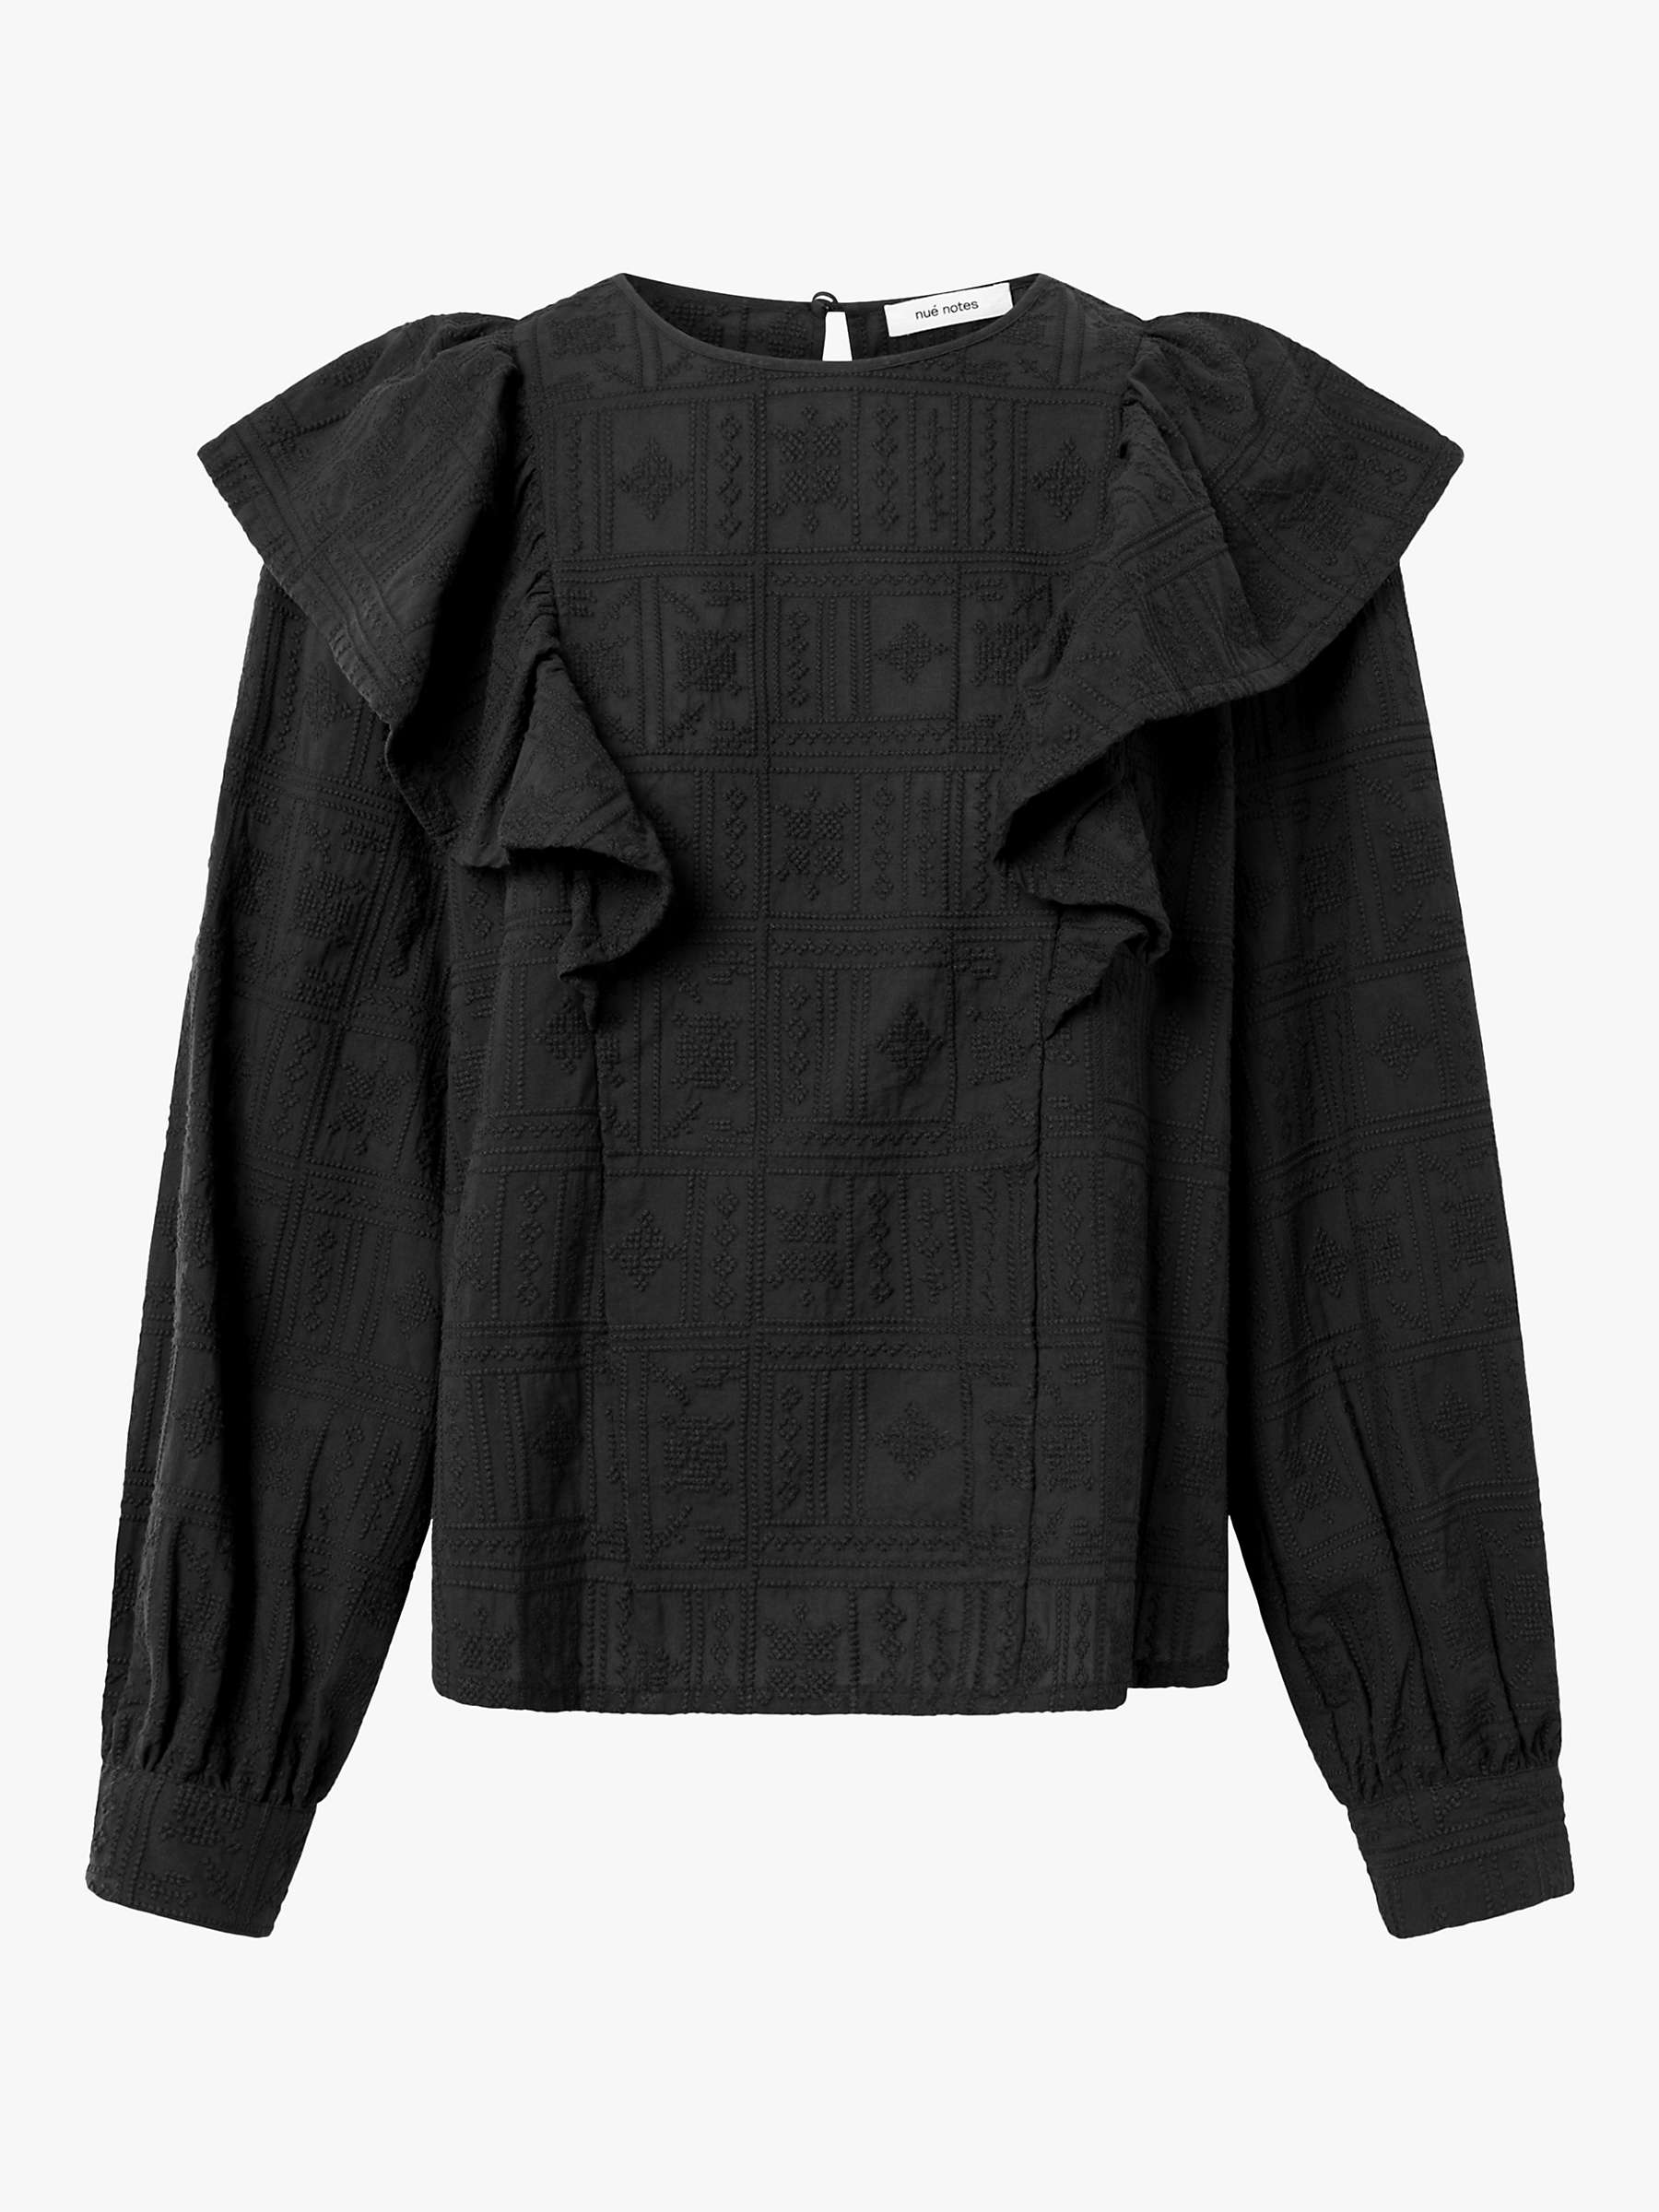 Buy nué notes Toulouse Ruffle Sleeve Top, Black Online at johnlewis.com